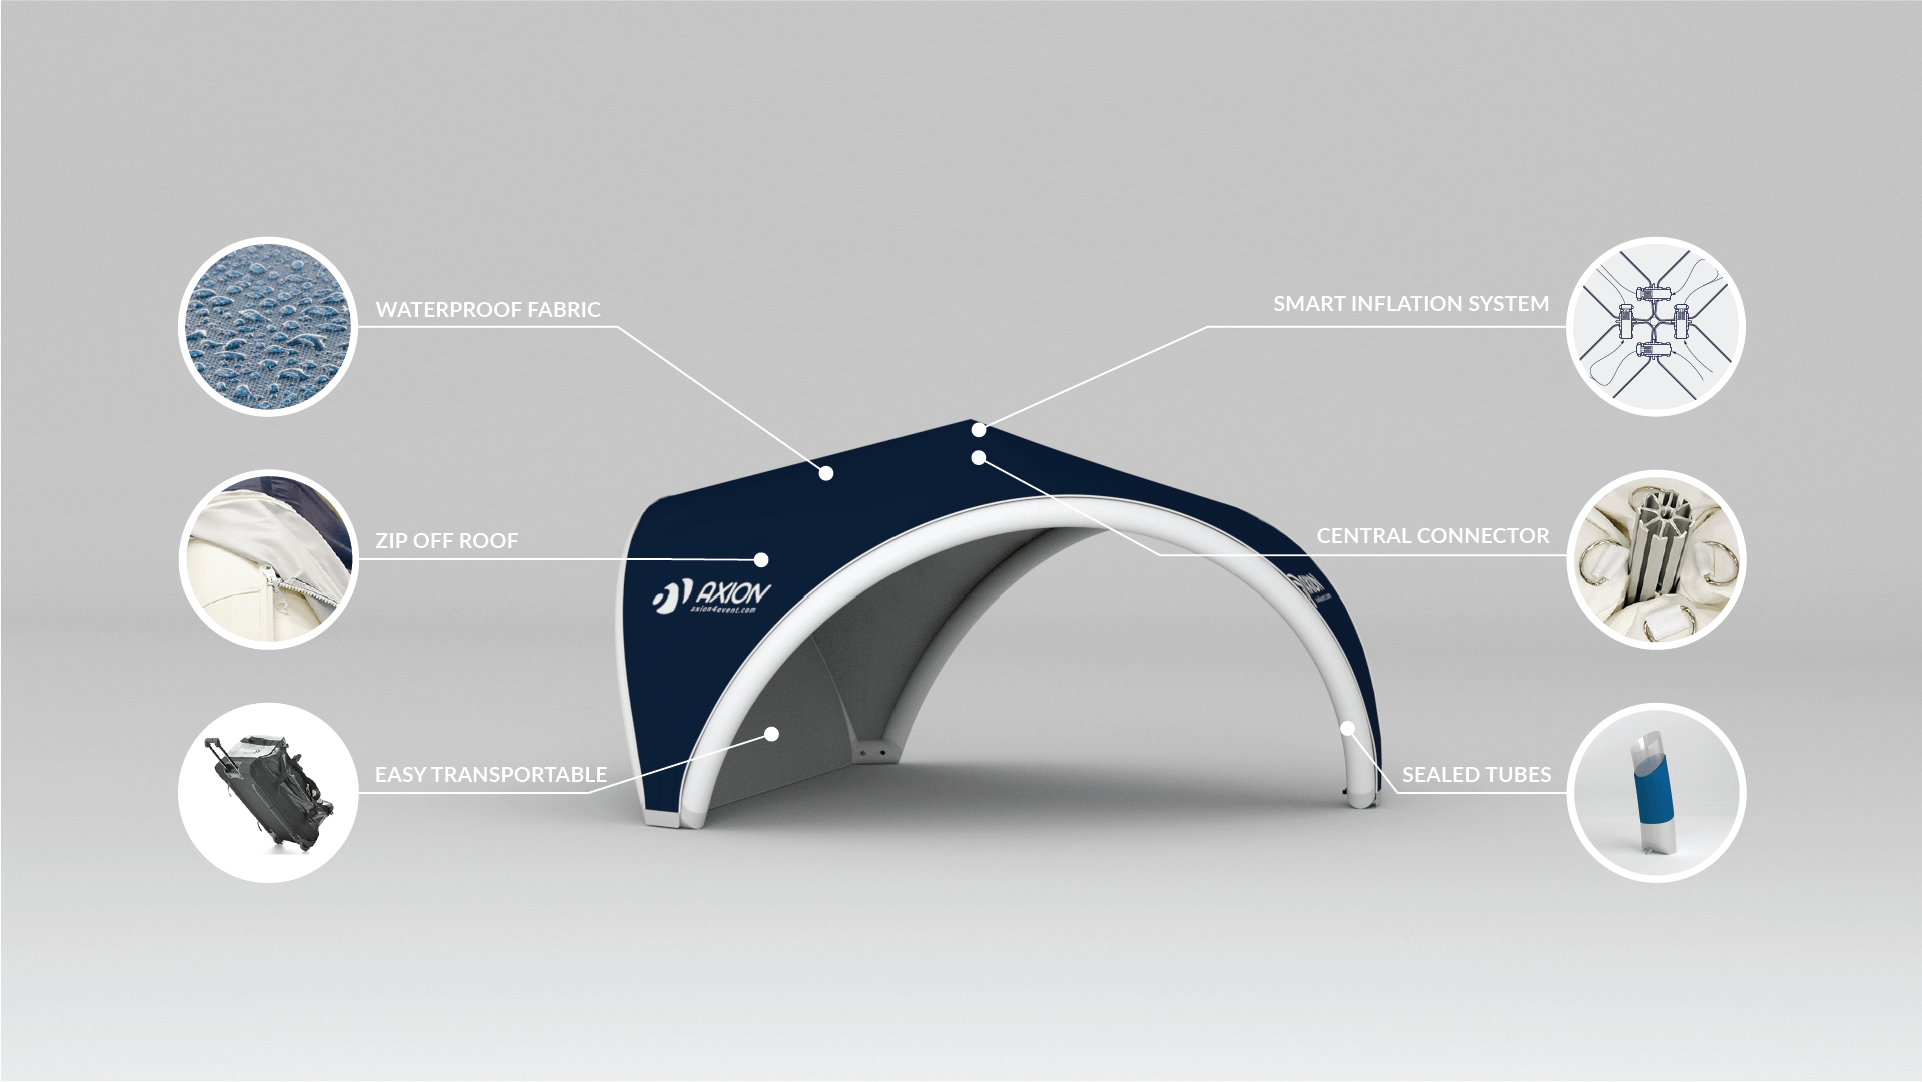 axion-square-tent_main-feature